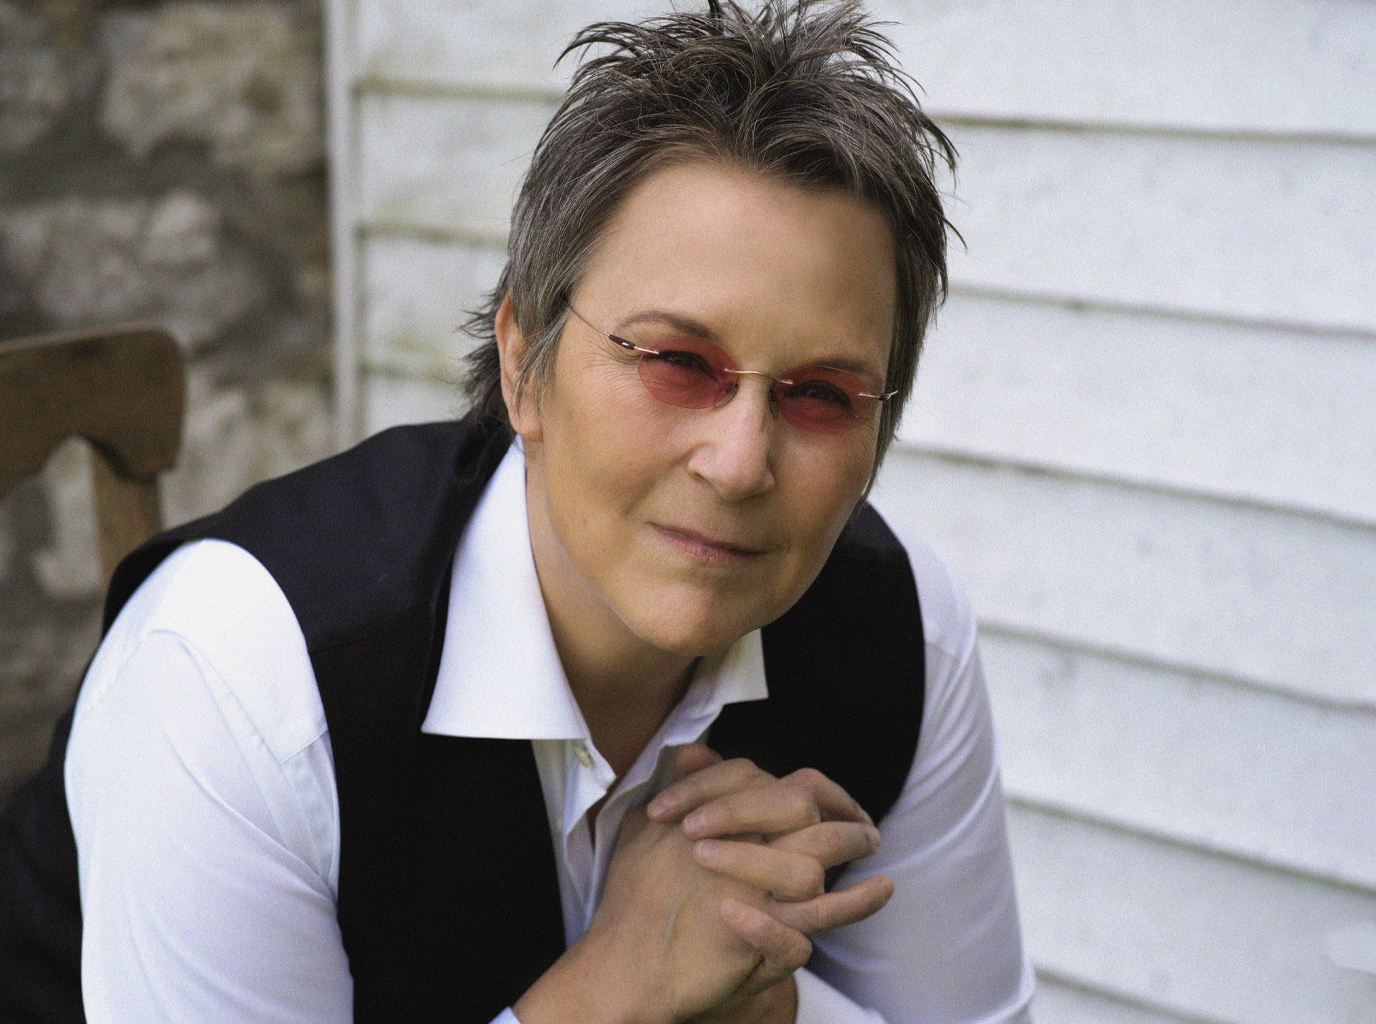 Mary Gauthier